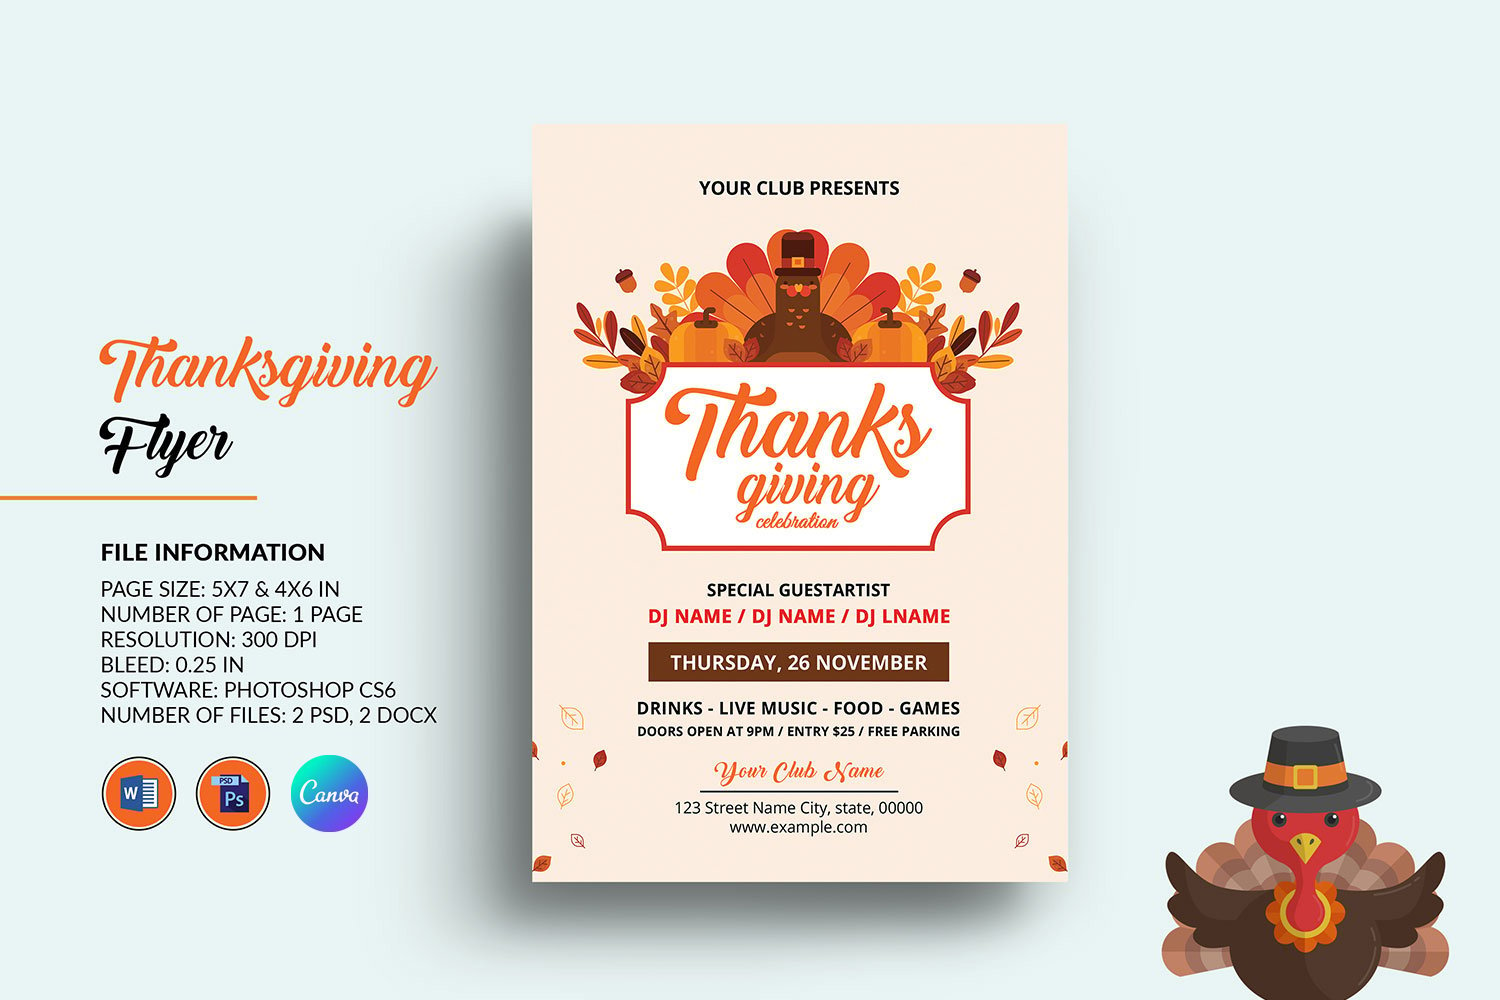 Template #362579 Invite Thanksgiving Webdesign Template - Logo template Preview